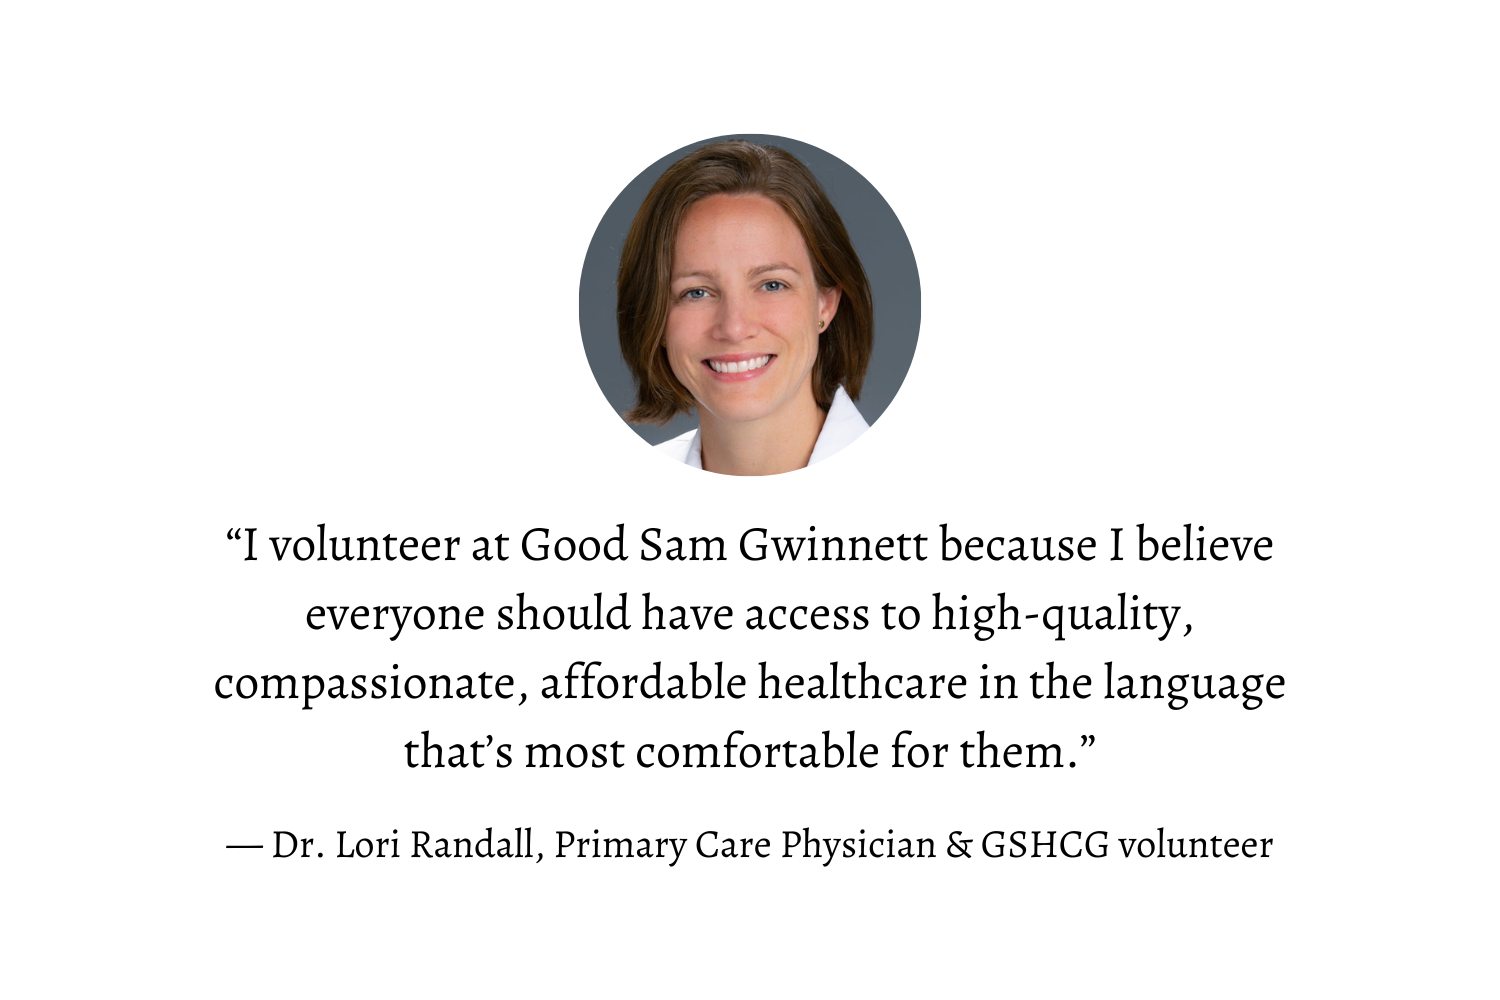 “I volunteer at Good Sam Gwinnett because I believe everyone should have access to high-quality, compassionate, affordable healthcare in the language that’s most comfortable for them.” — Dr. Lori Randall, Primary Care Physician & GSHCG Volunteer